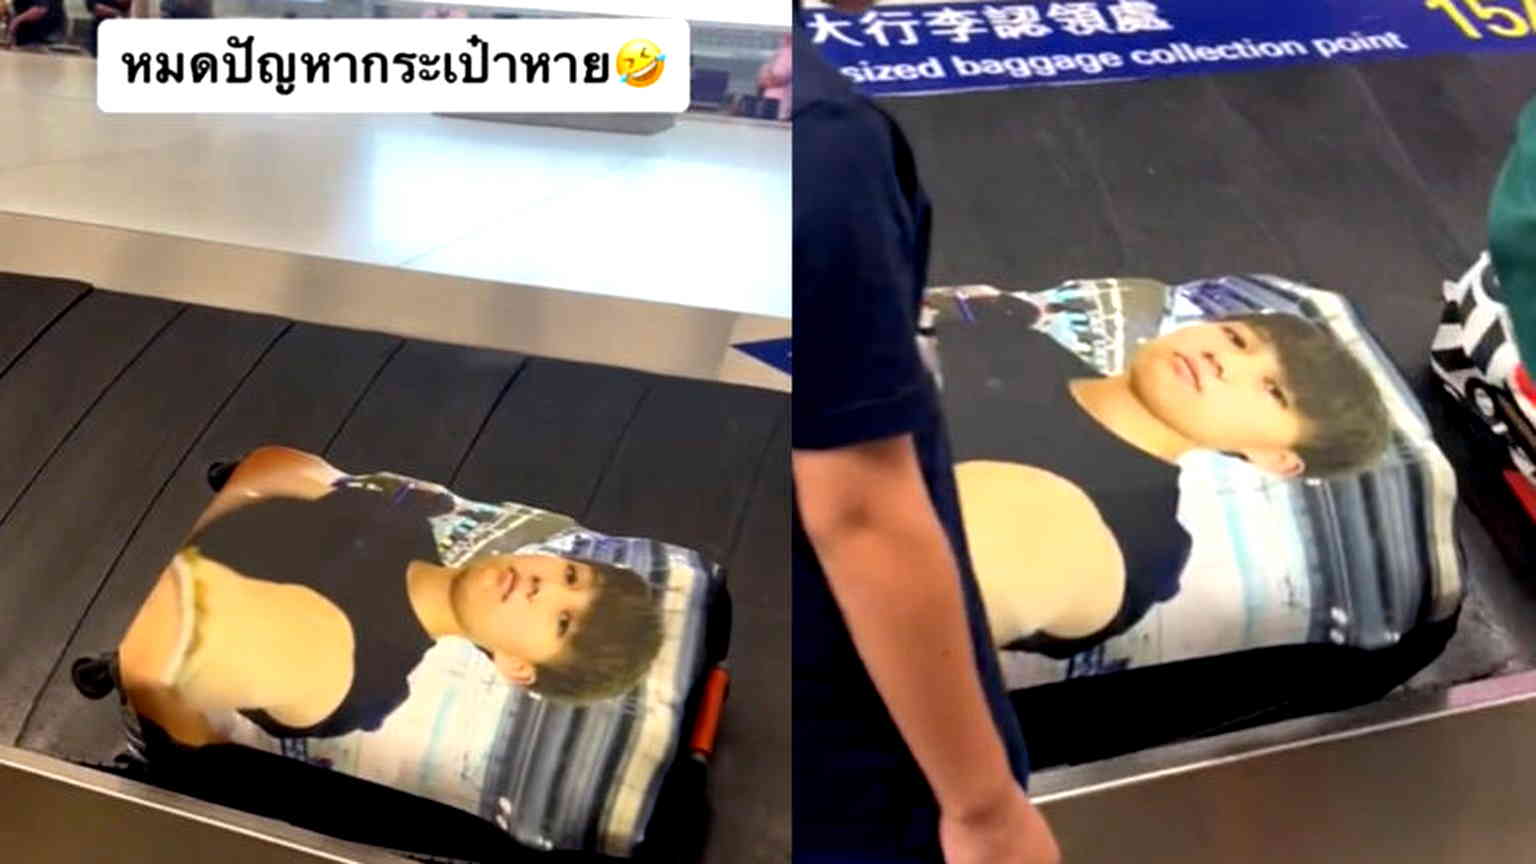 Thai man leaves TikTok in stitches for printing his face on his suitcase